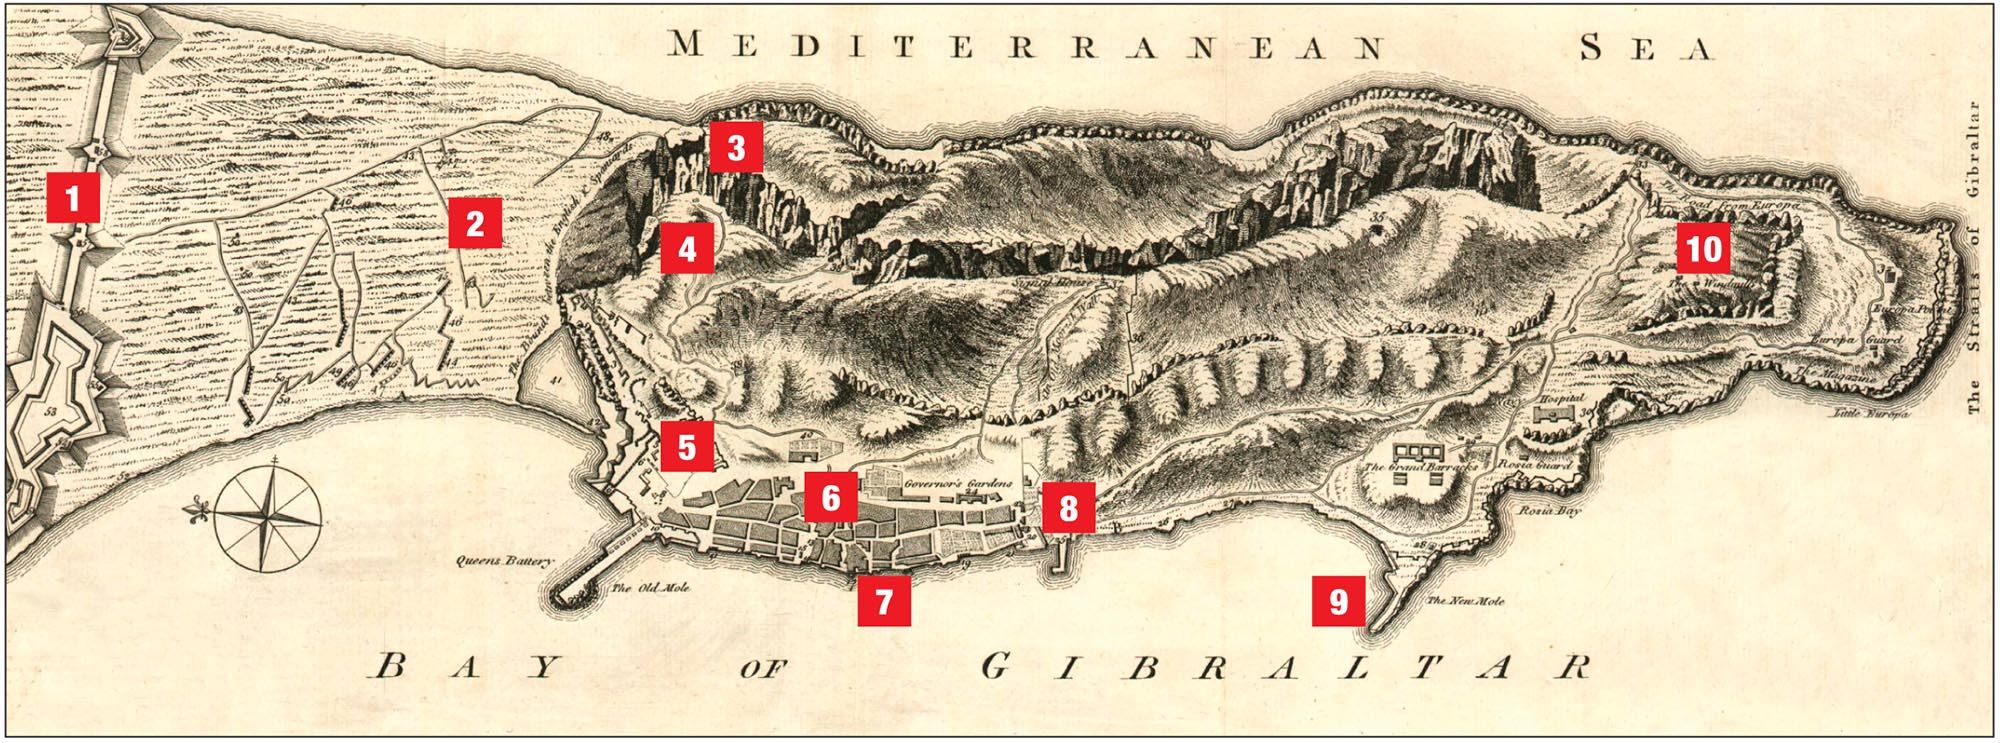 Key positions during the Great Siege of Gibraltar are (1) Spanish defense works, (2) siege trenches, (3) the Rock, (4) Willis’ Battery, (5) Grand Battery, (6) Gibraltar town, (7) King’s Bastion, (8) South Bastion, (9) New Mole, (10) and Windmill Hill. 